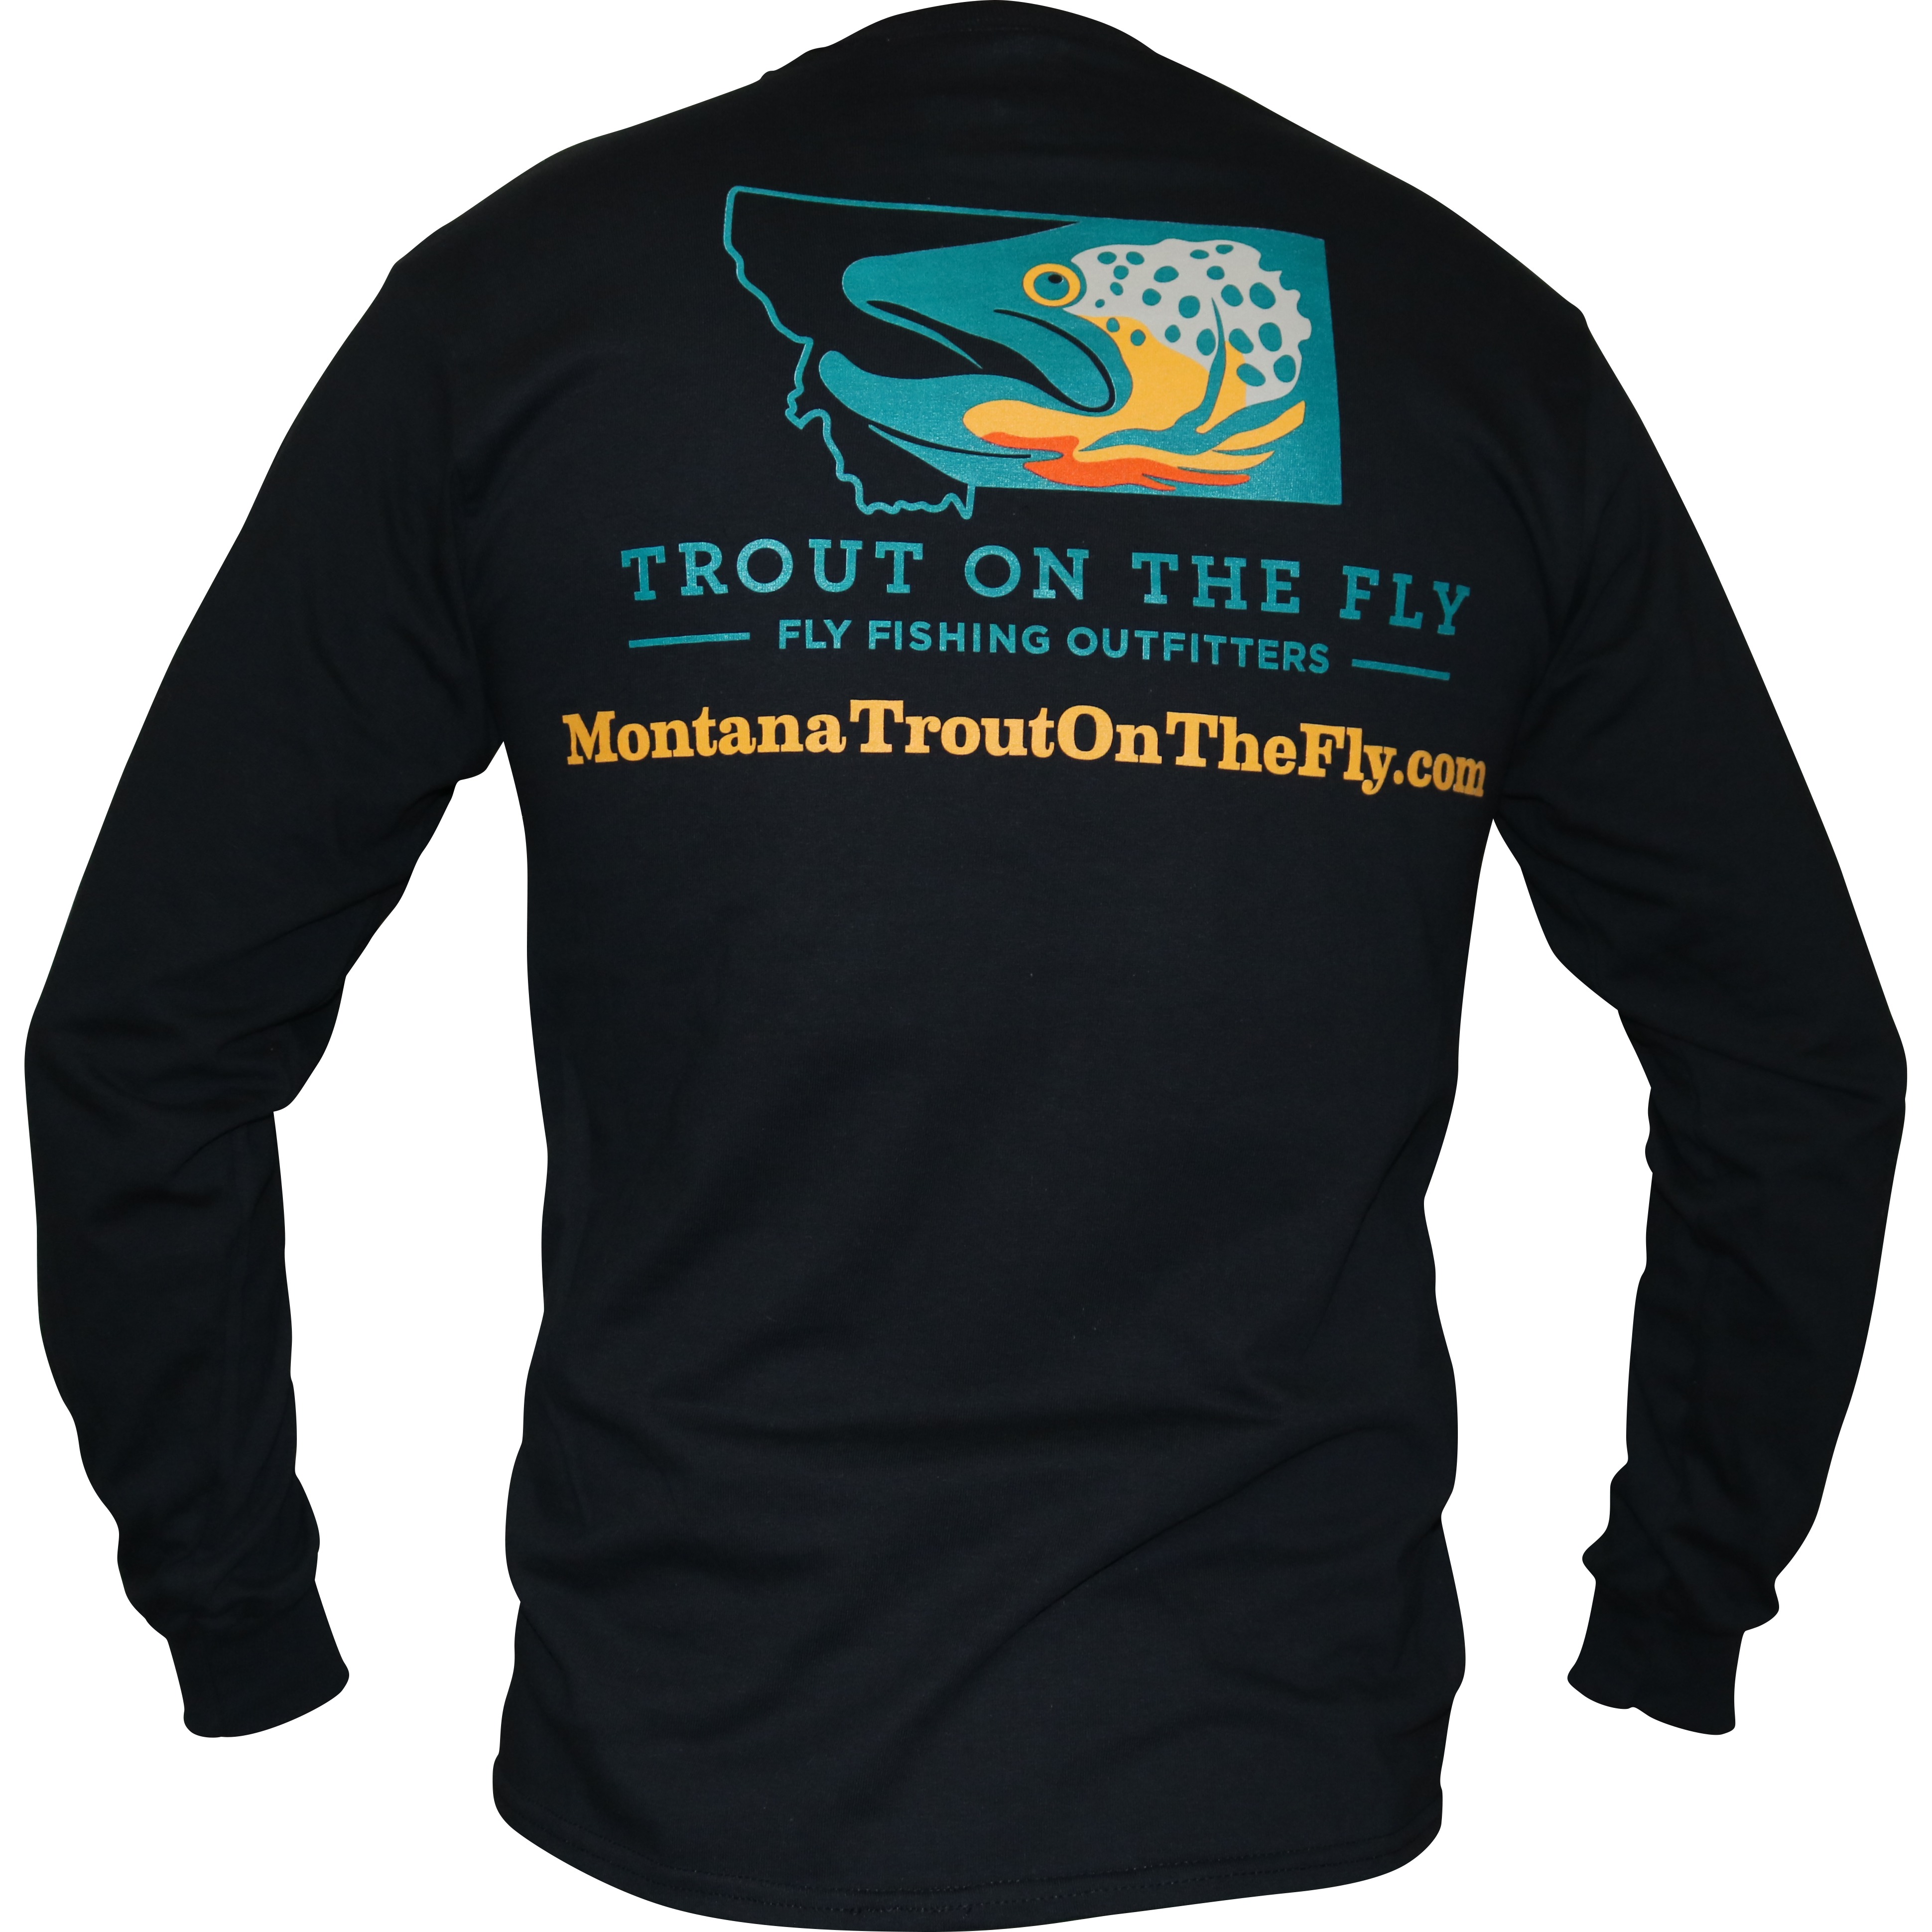 TOTF Long Sleeve Shirt - Trout On The Fly